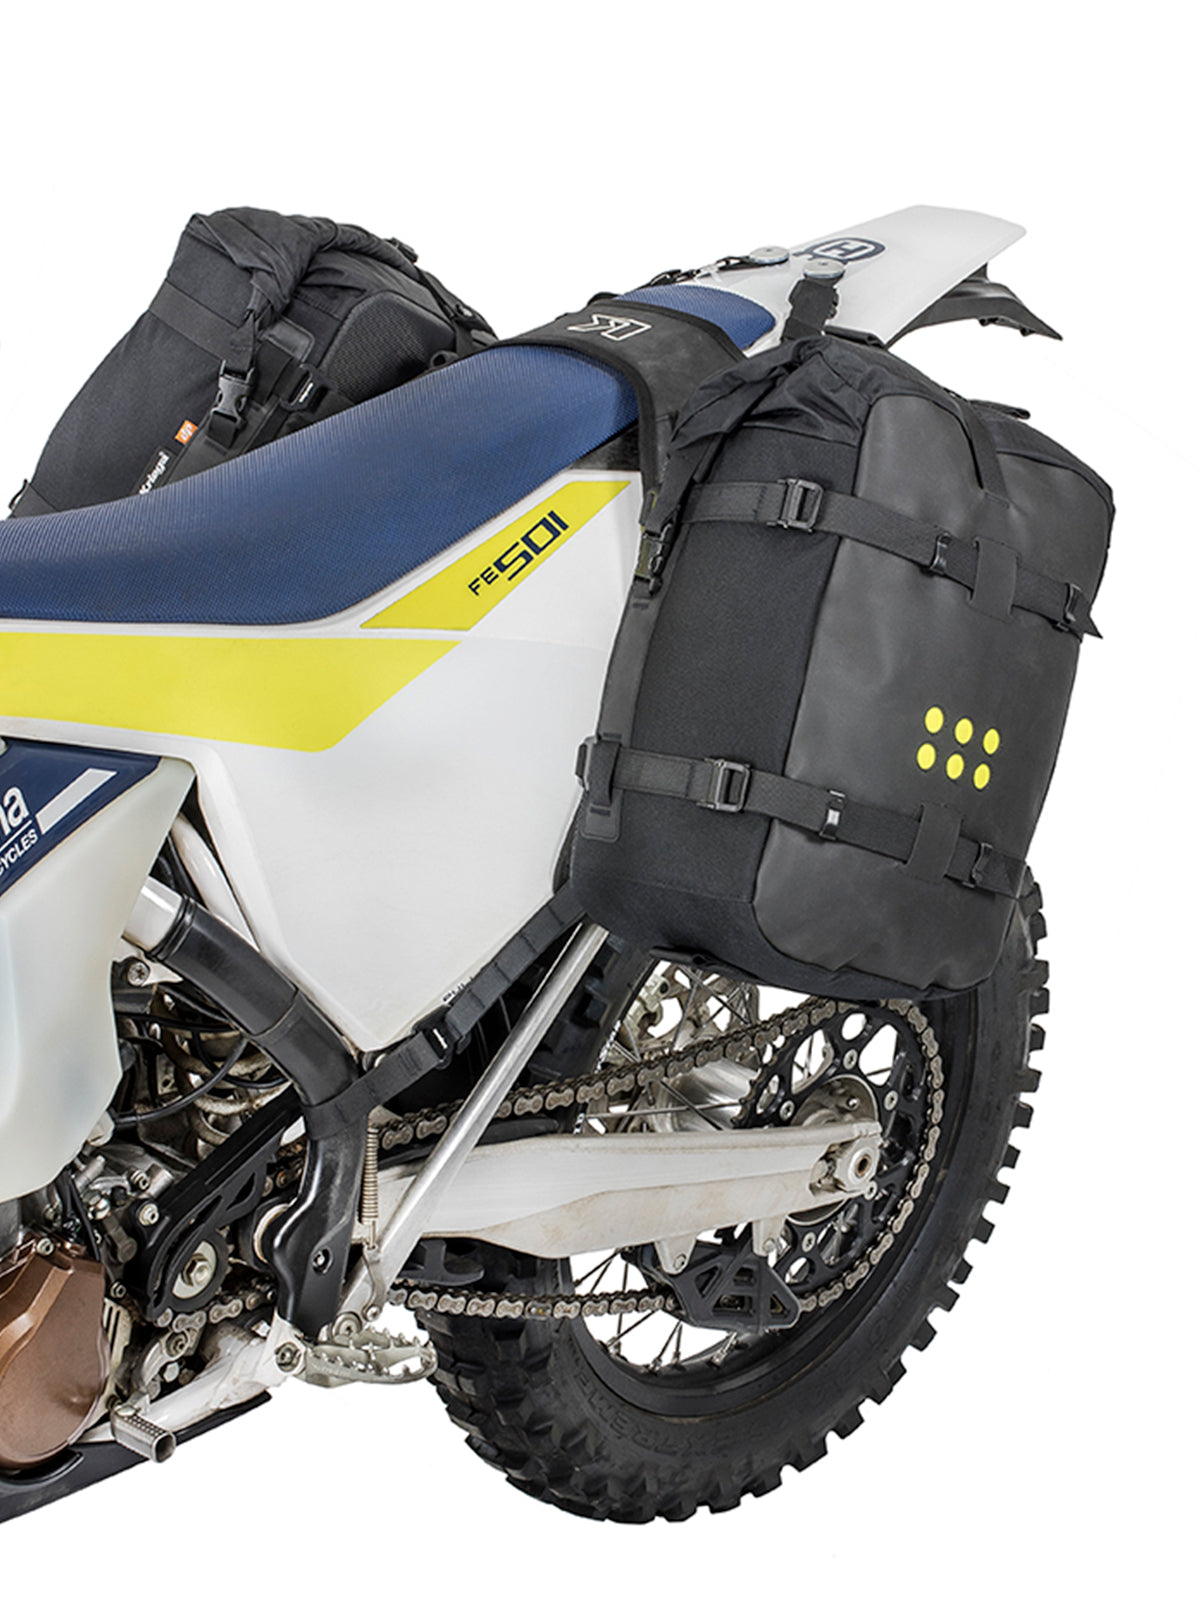 Kriega OS-Combo 36 fitted to rear of Husqvarna